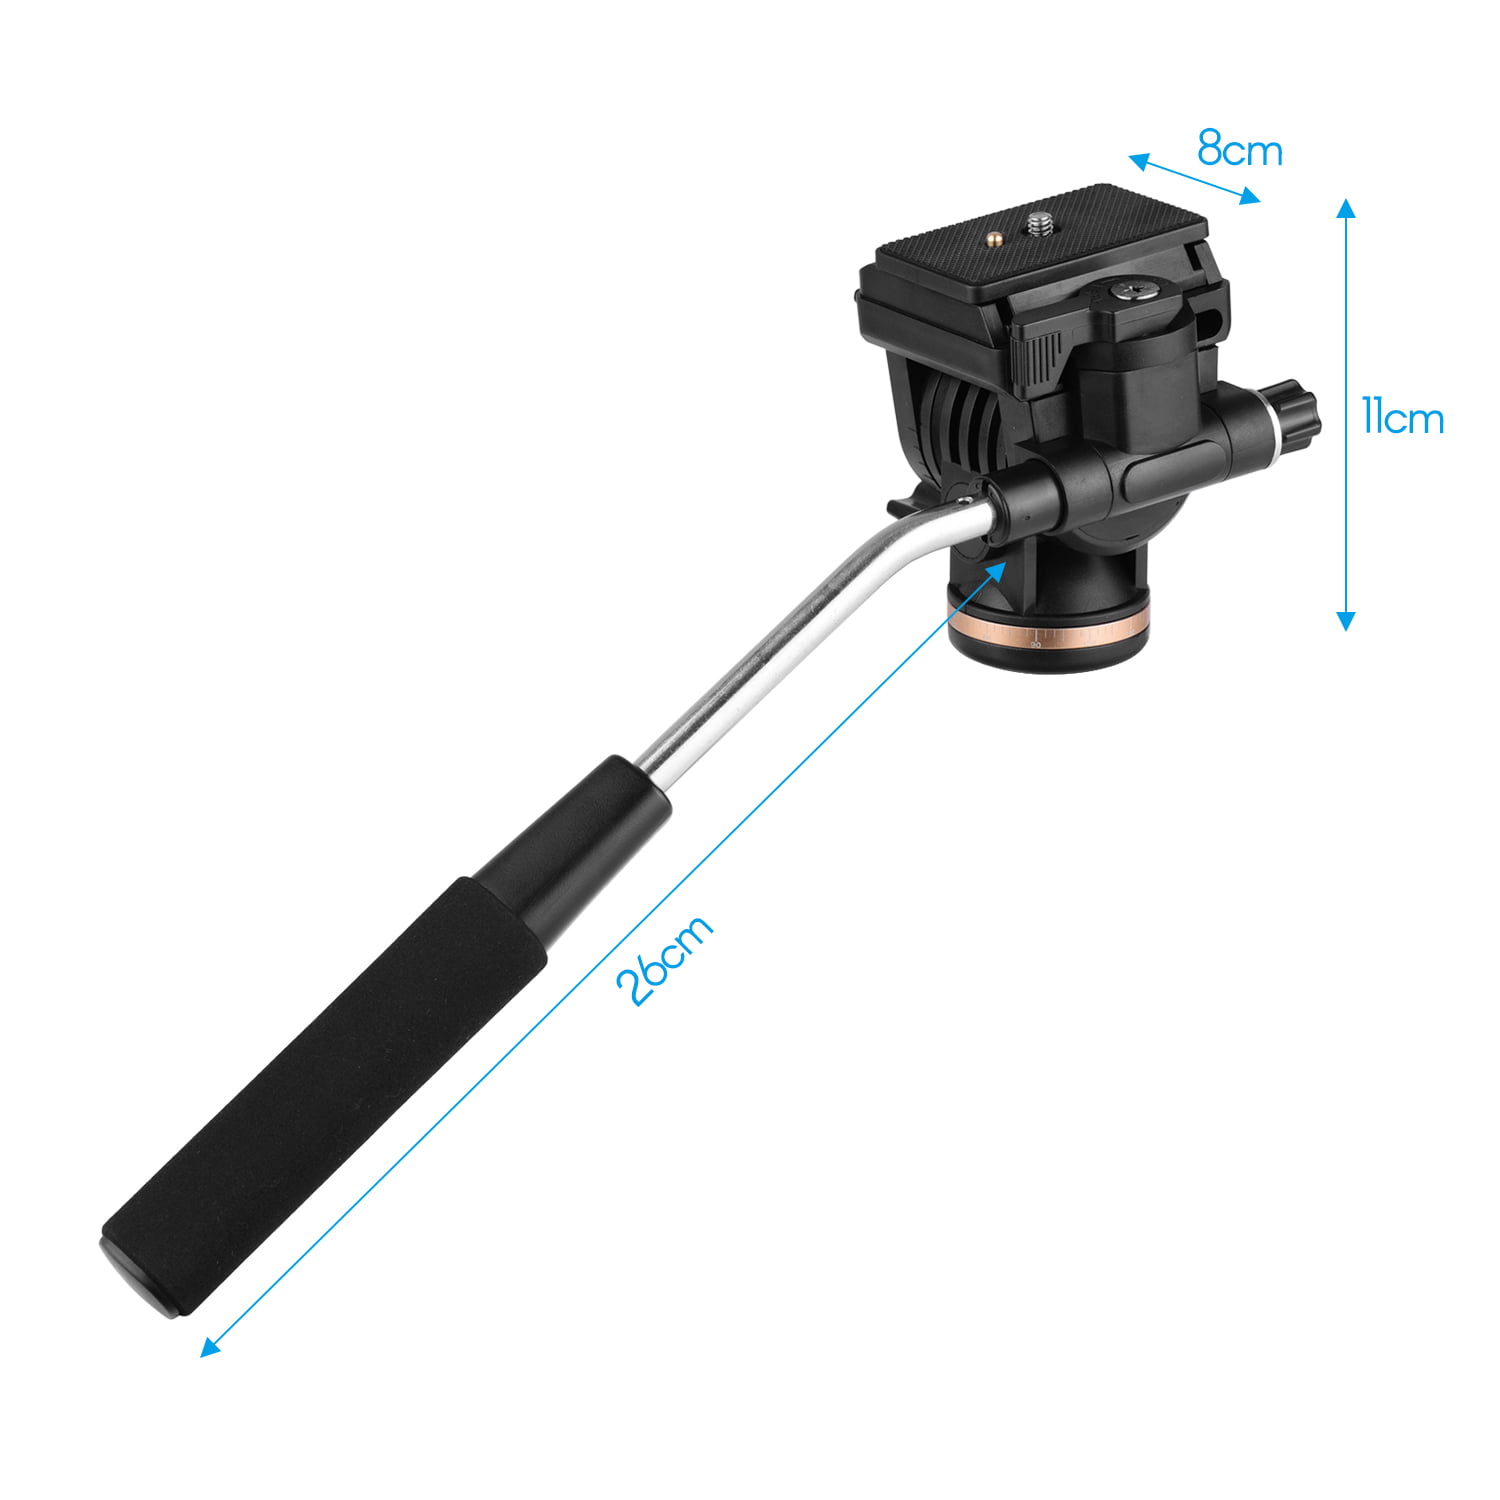 Moman Tripod Fluid Drag Pan Head with Handle and Tabletop Tripod with 360 Degree Camera Ball Head